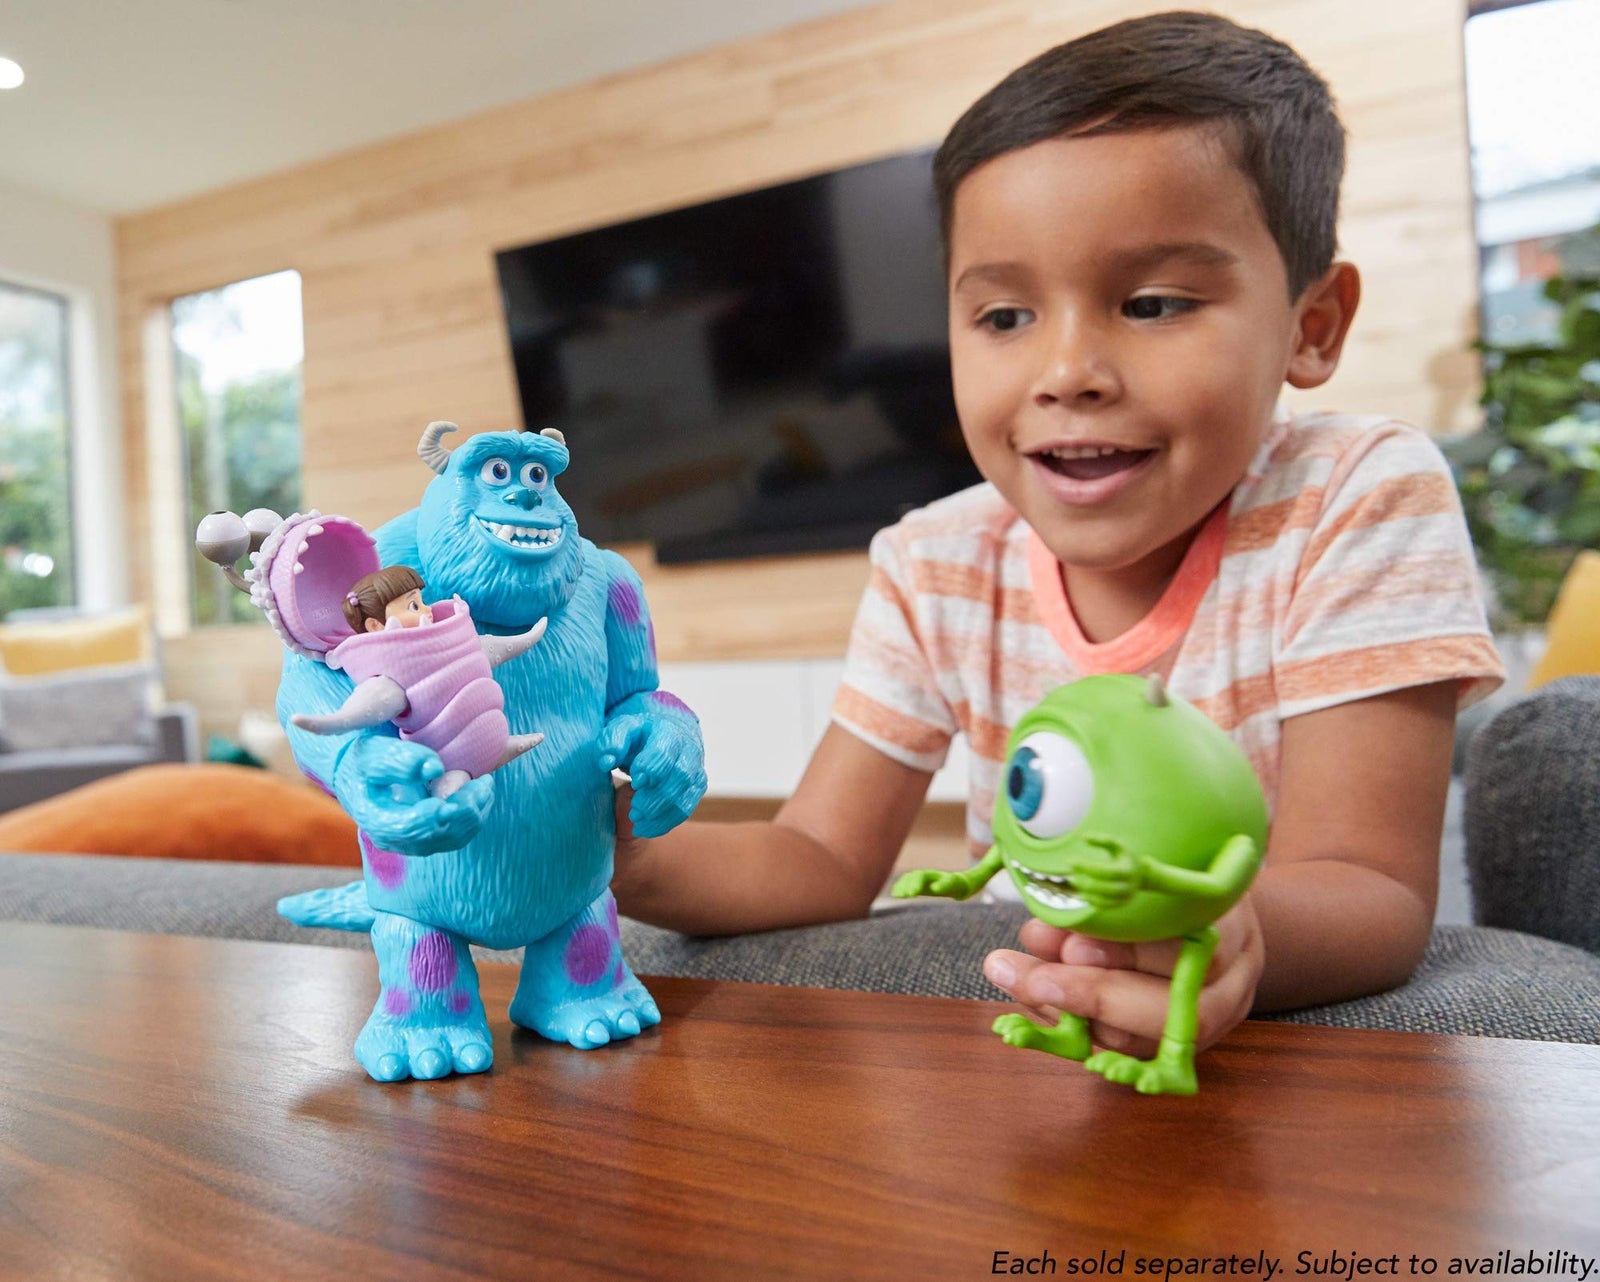 Pixar Mattel Mike and Boo Monsters, Inc. Character Action Dolls Highly Posable with Authentic Designs for Storytelling, Collecting, Movie Toys for Kids Gift Ages 3 and Up